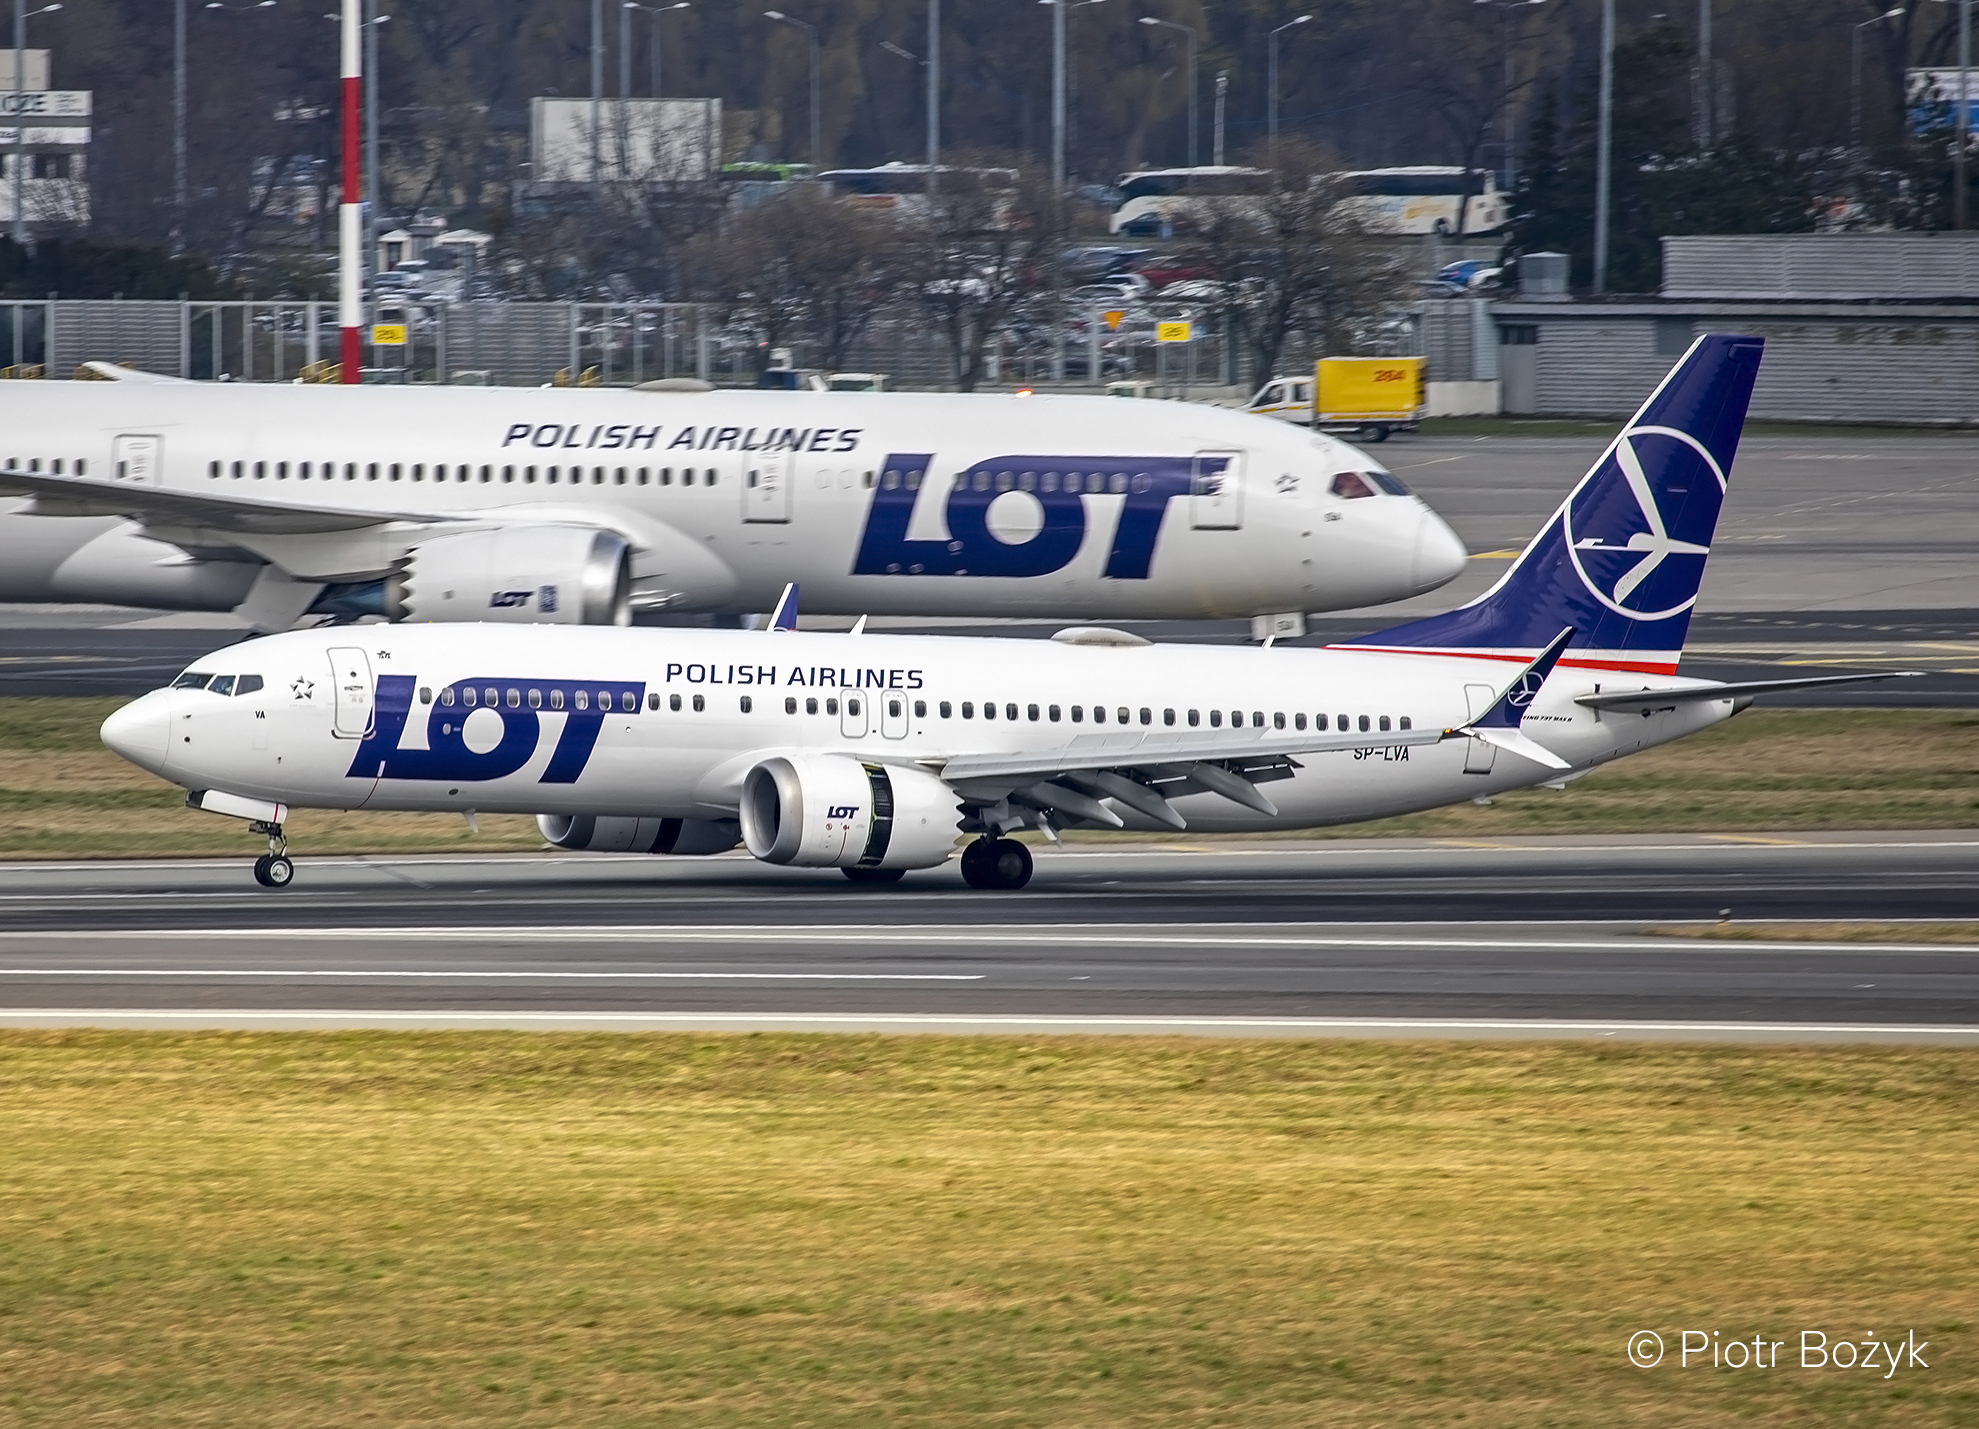 Two LOT Polish Airlines aircraft pass each other on the taxiway.